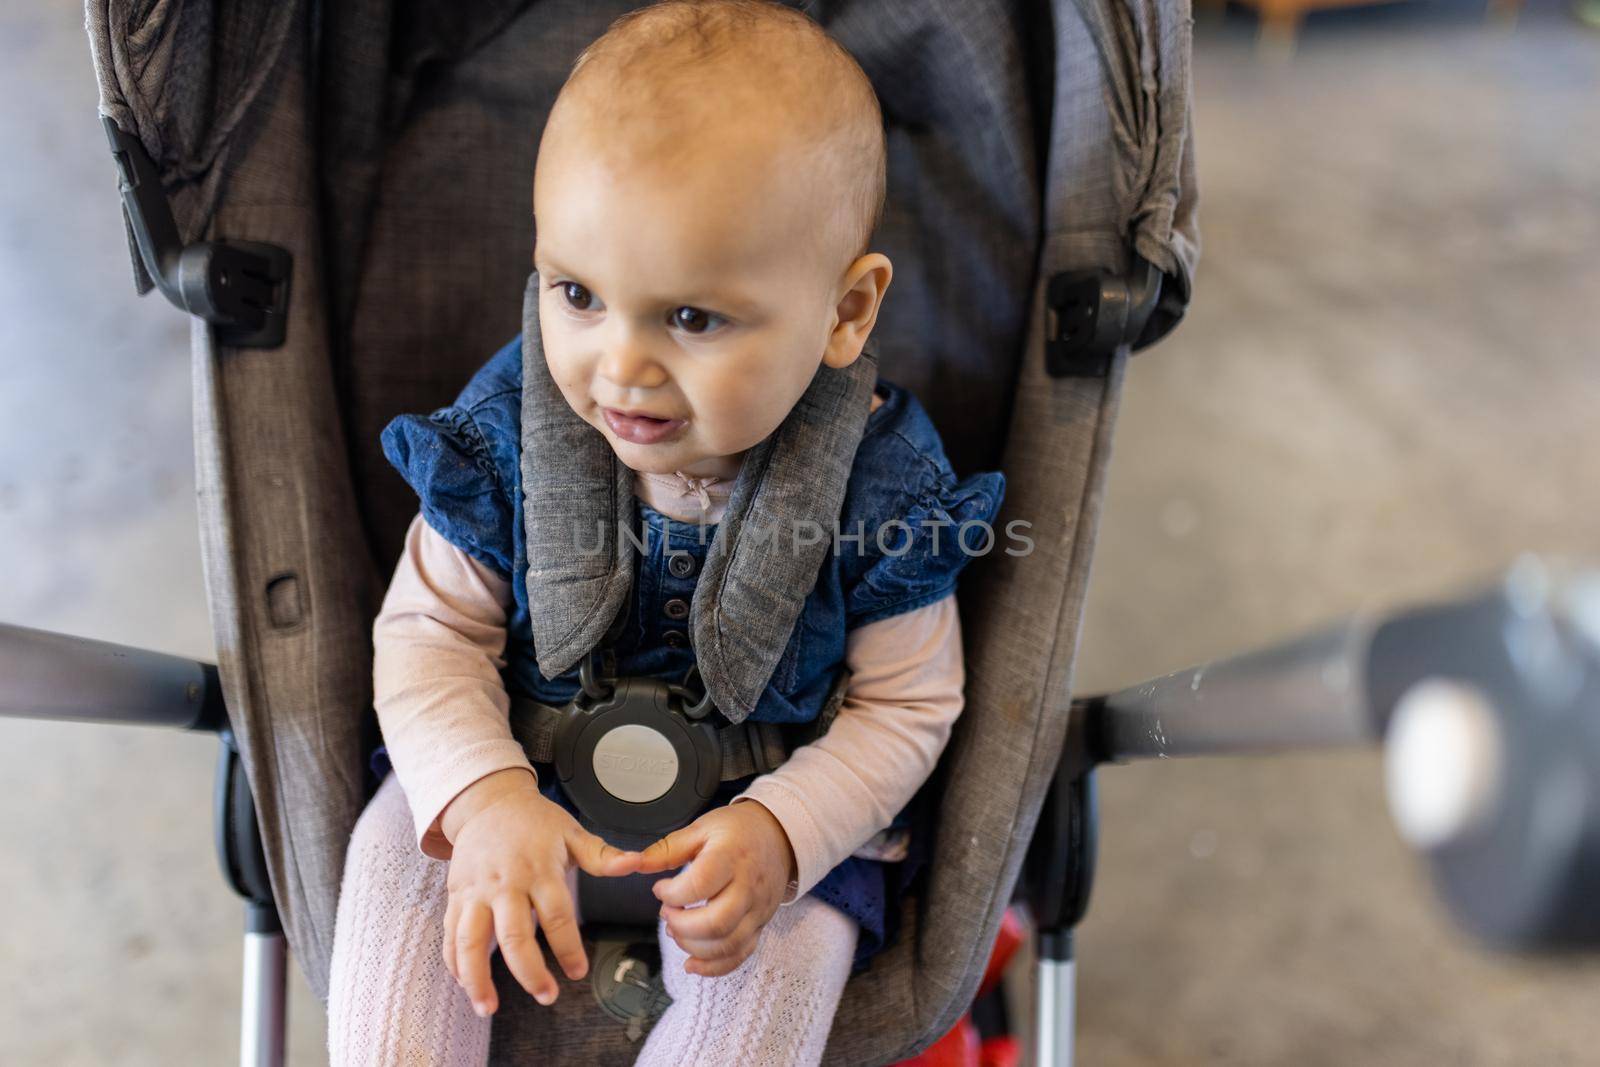 Adorable view of happy baby in gray stroller with blurry background. Portrait of cute infant in blue dress resting in stroller inside a restaurant. Peaceful toddlers indoors